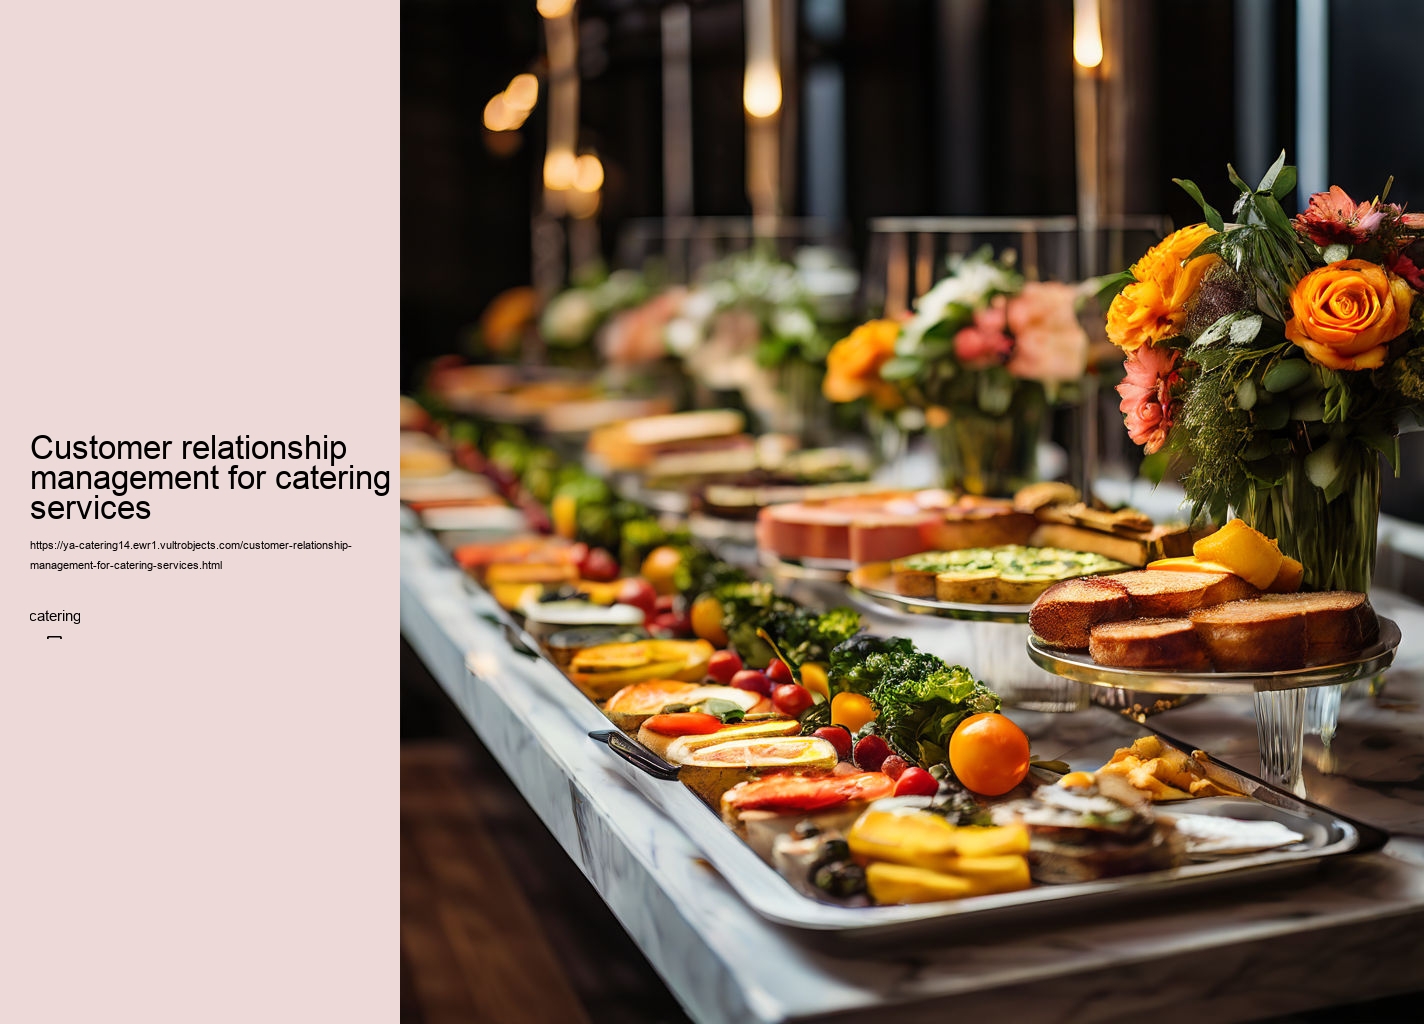 Customer relationship management for catering services